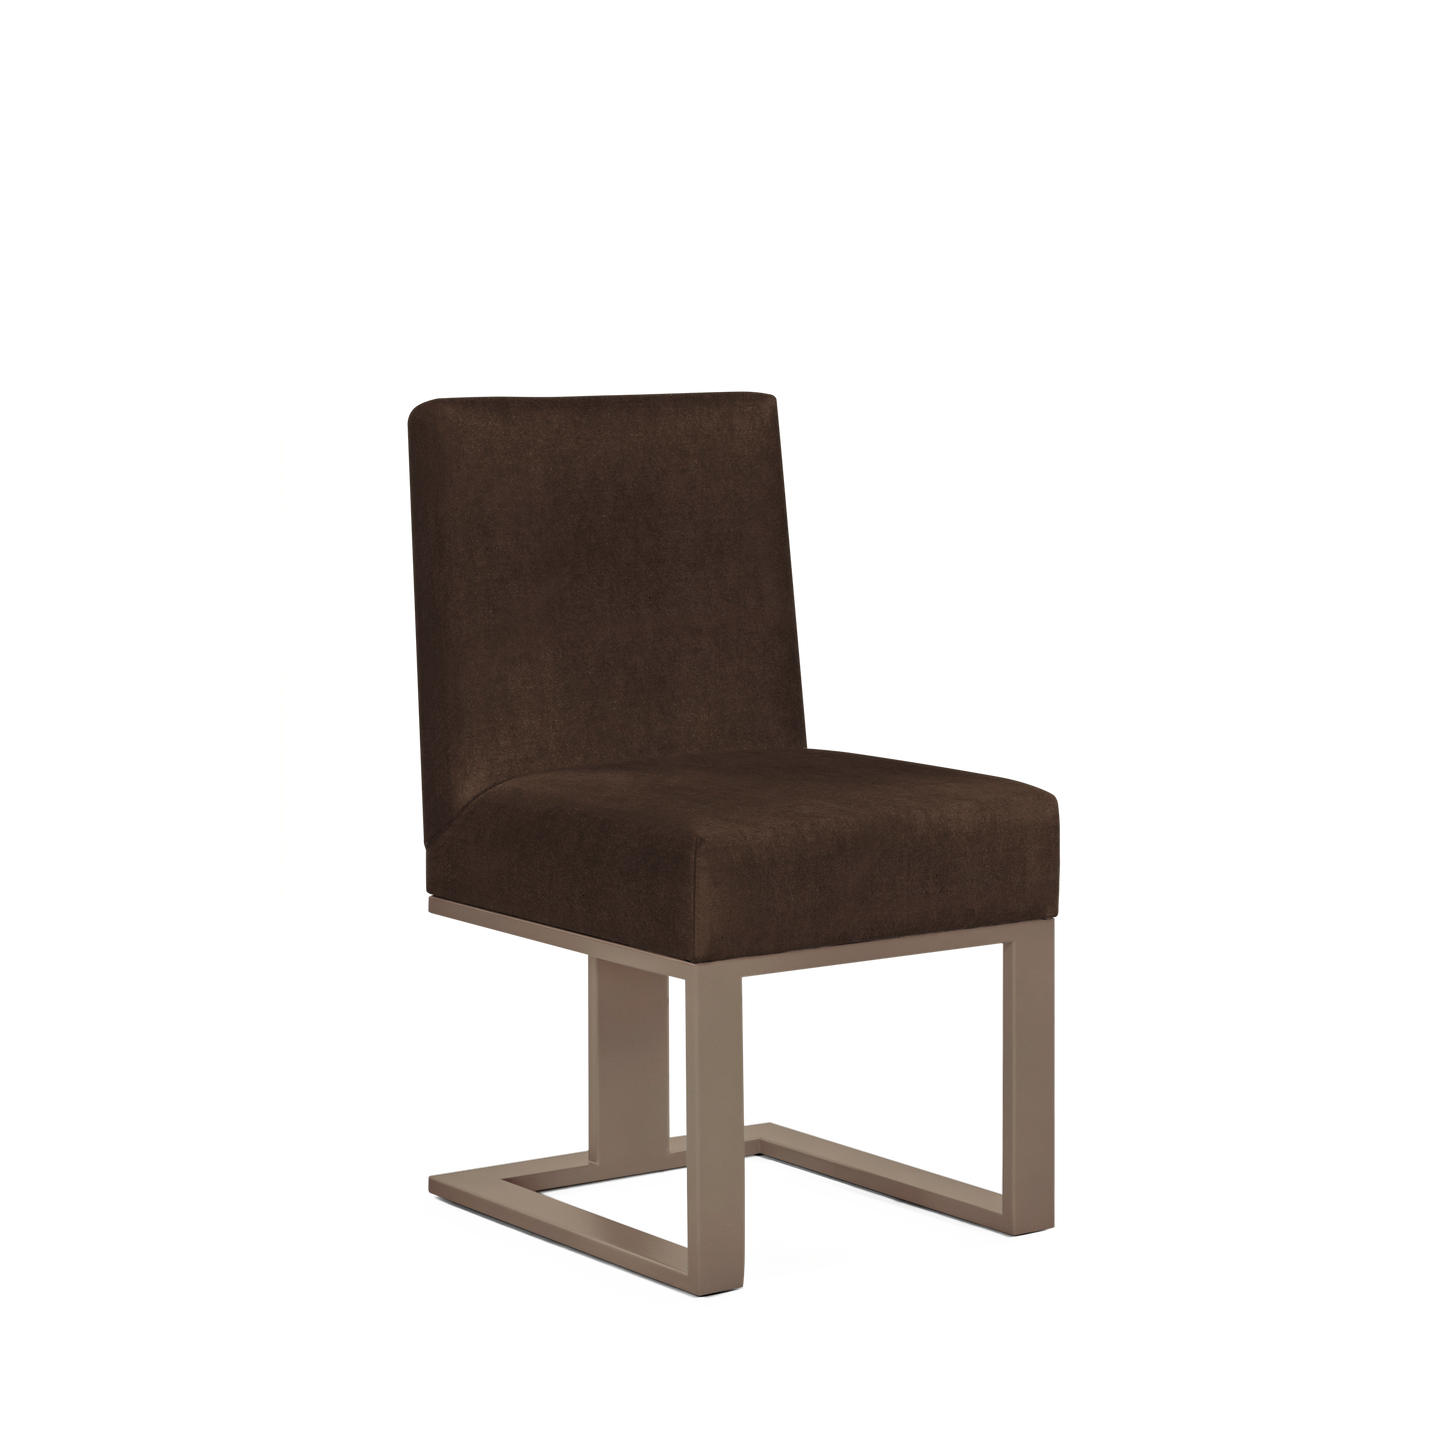 Len chair with suede brown textile and champagne wood legs 